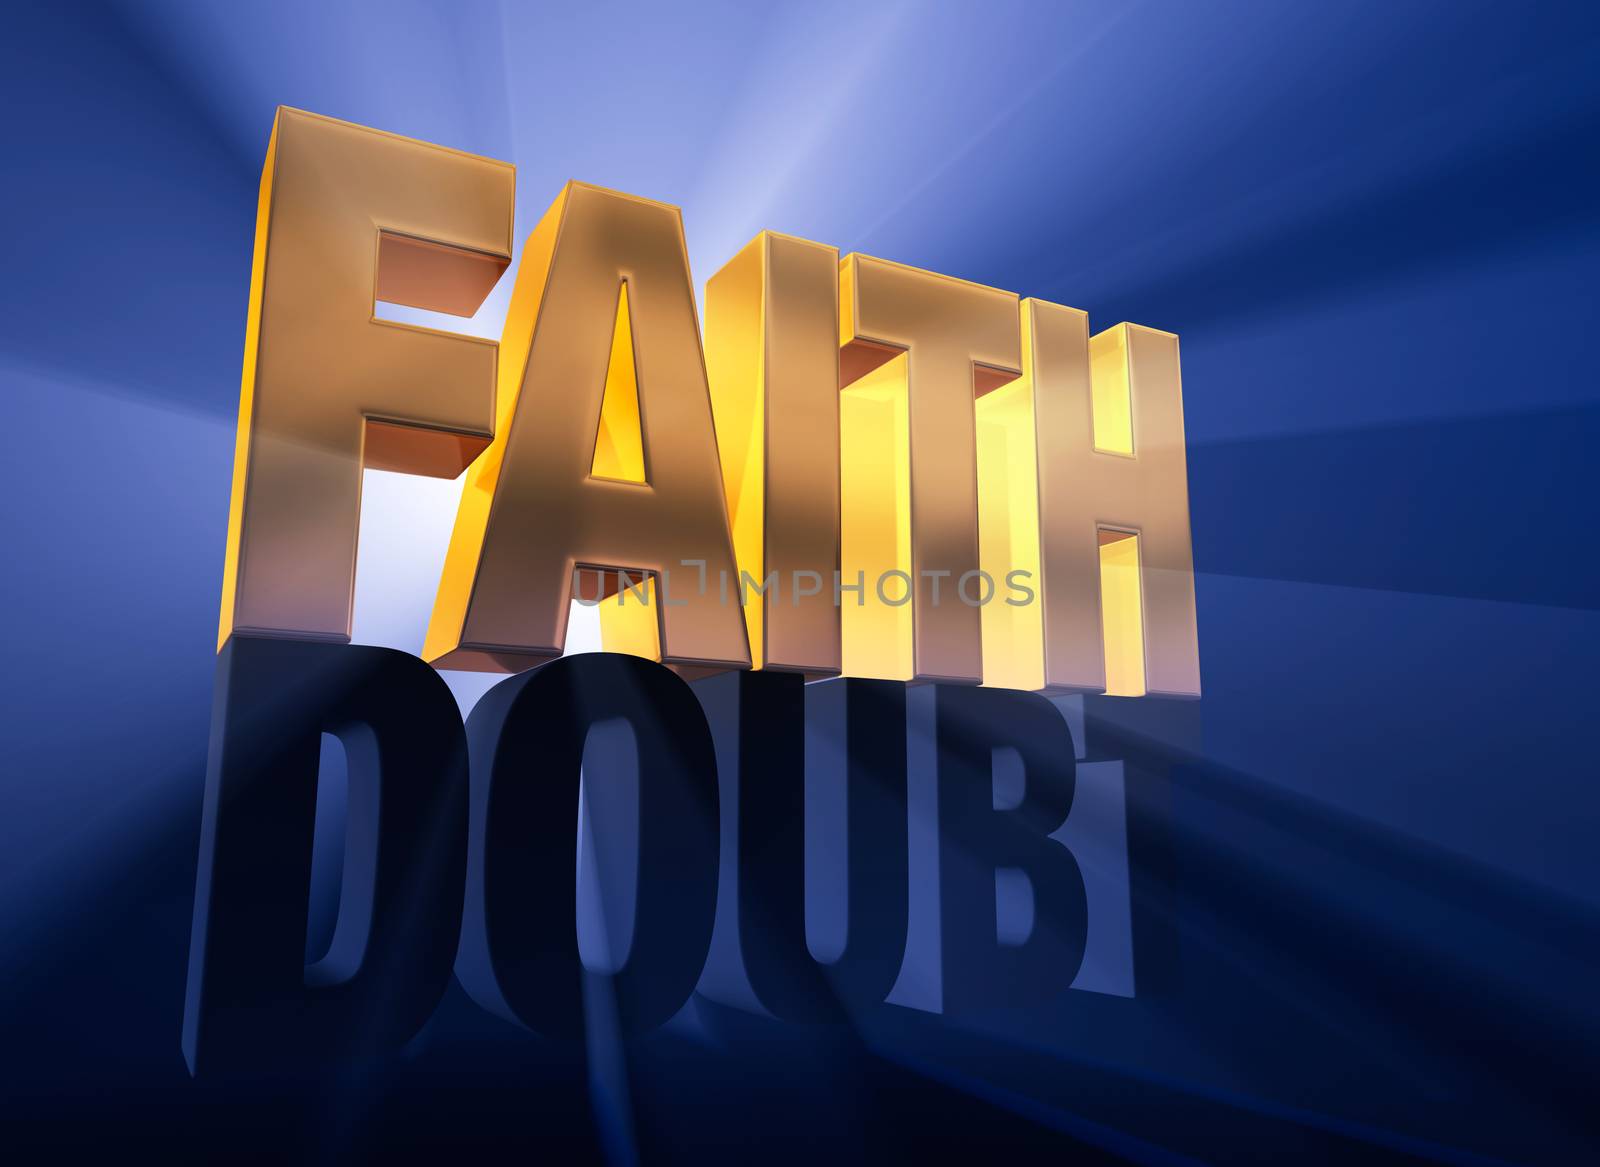 A shiny, gold "FAITH" sits atop a dark gray "DOUBT" on a deep blue background brilliantly back lit with light rays shining through both words.
